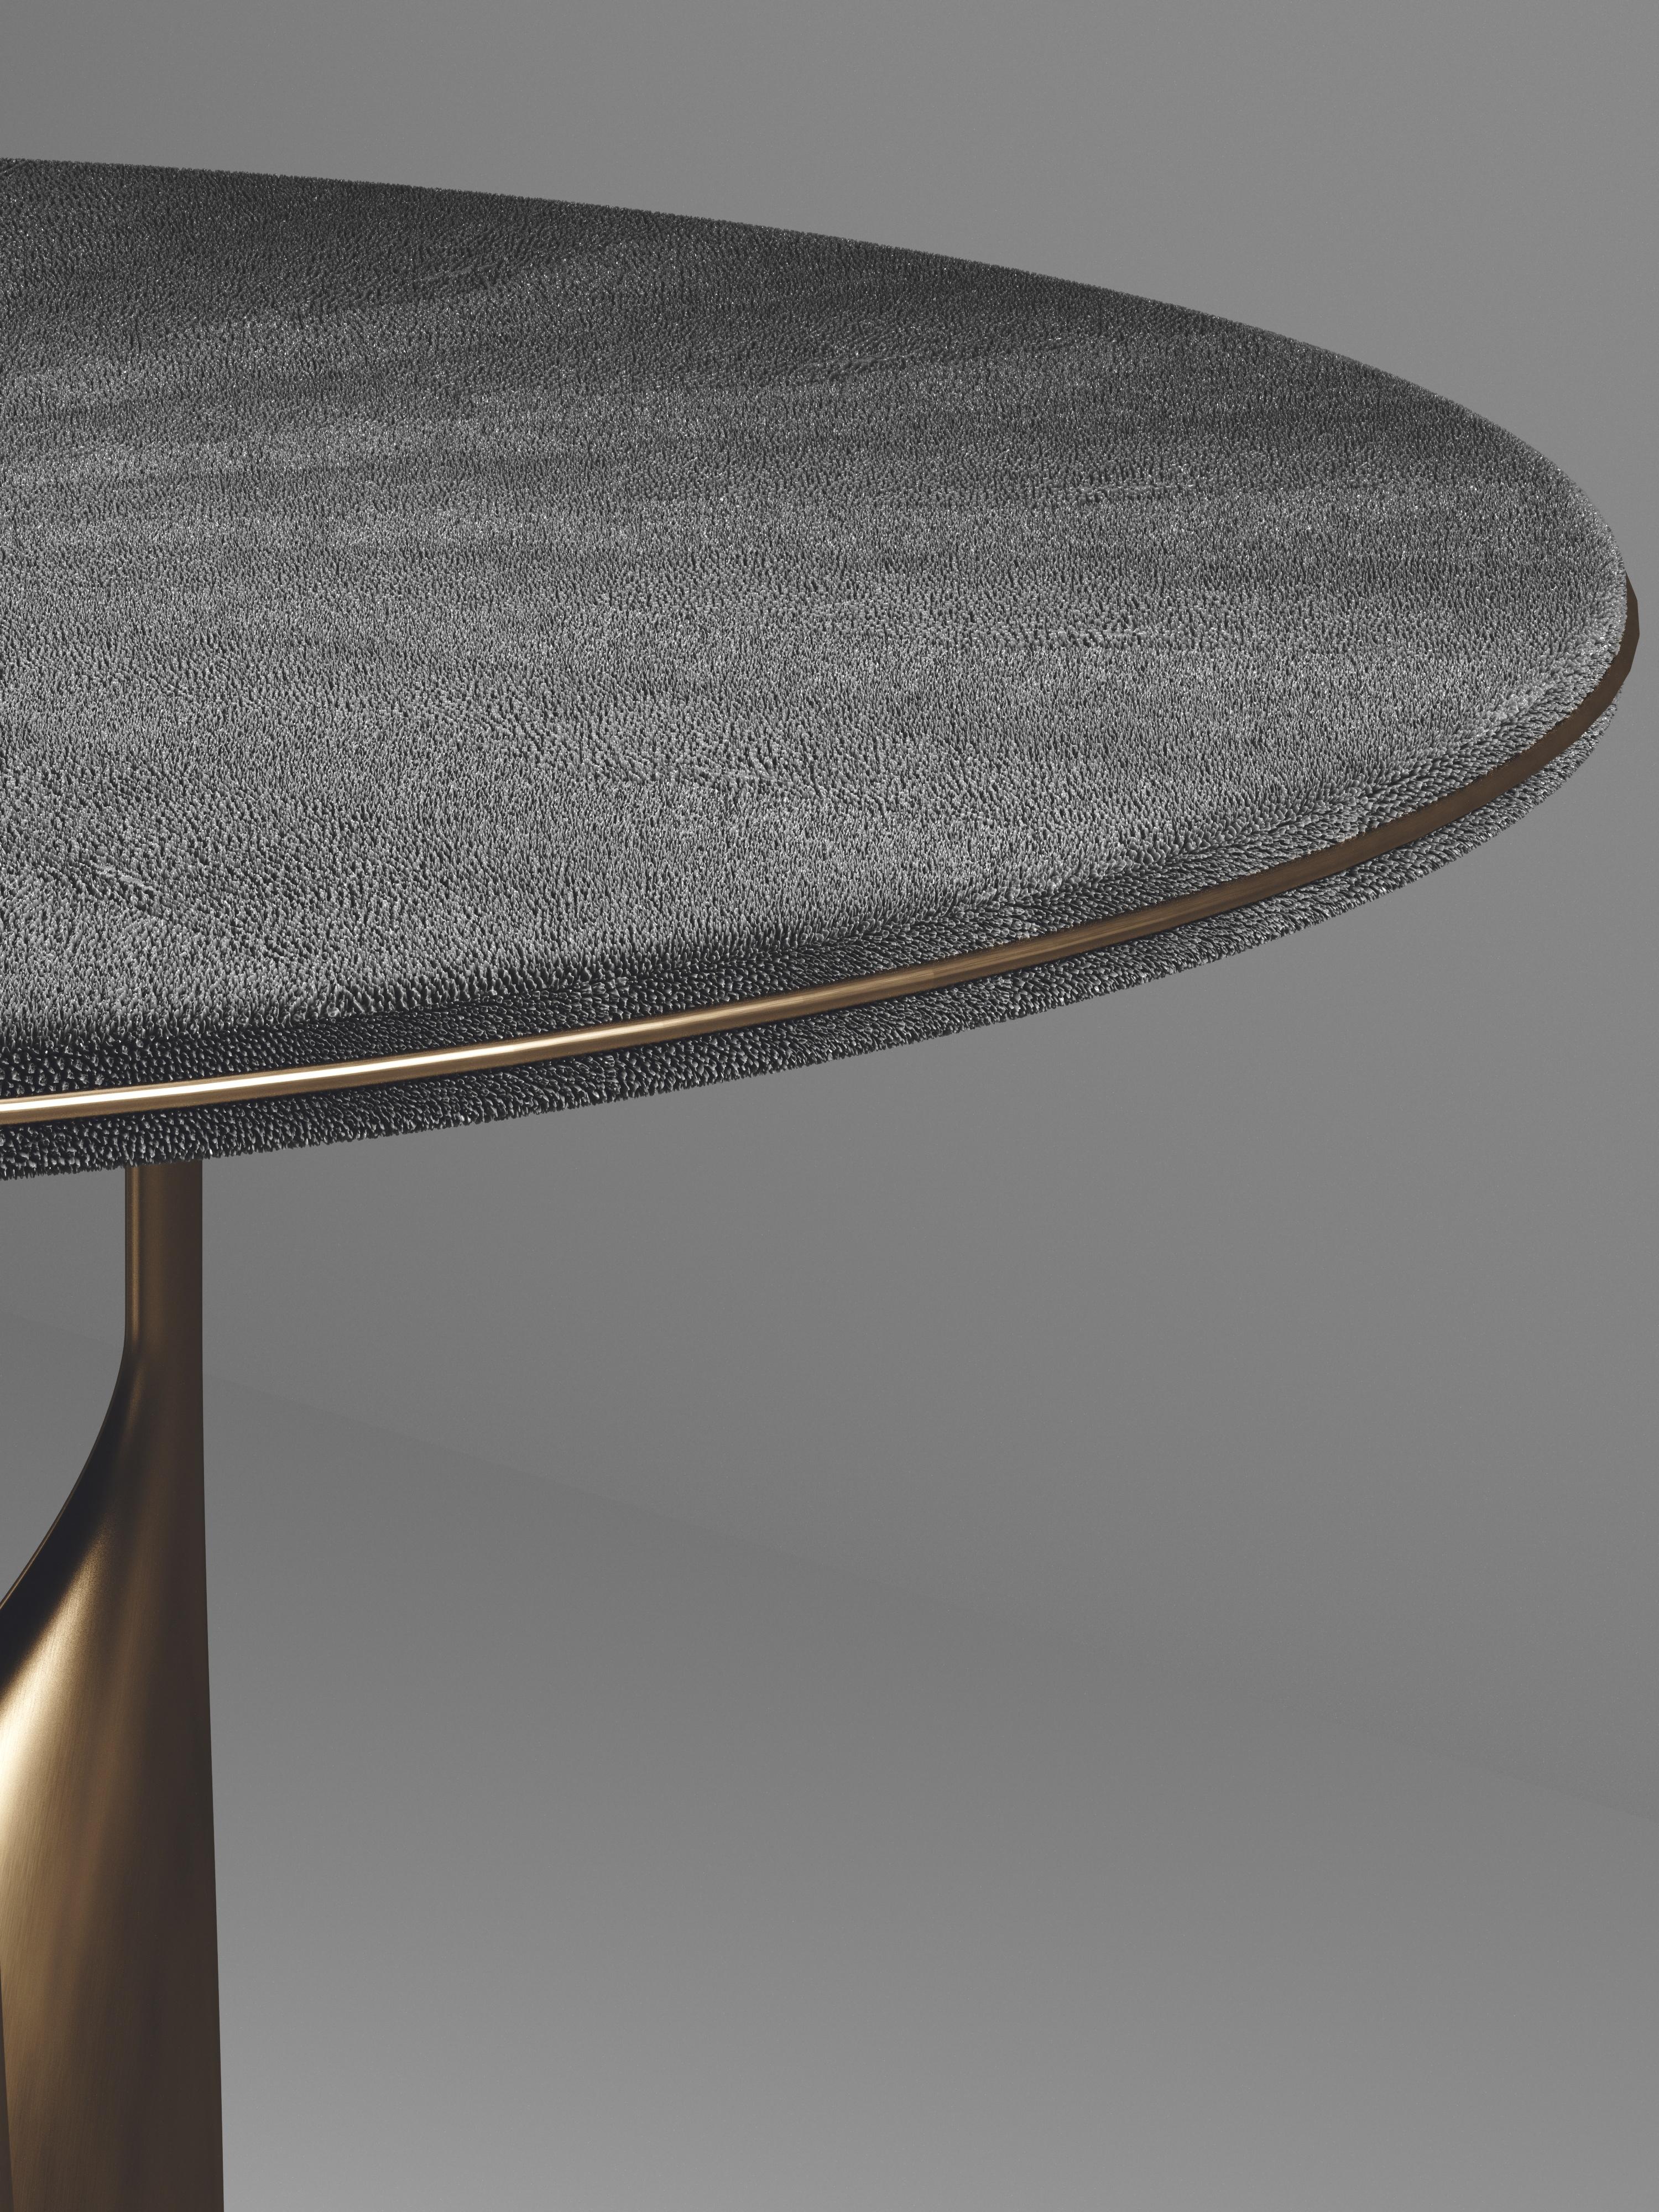 French Shagreen Breakfast Table with Bronze Patina Brass Details by Kifu Paris For Sale